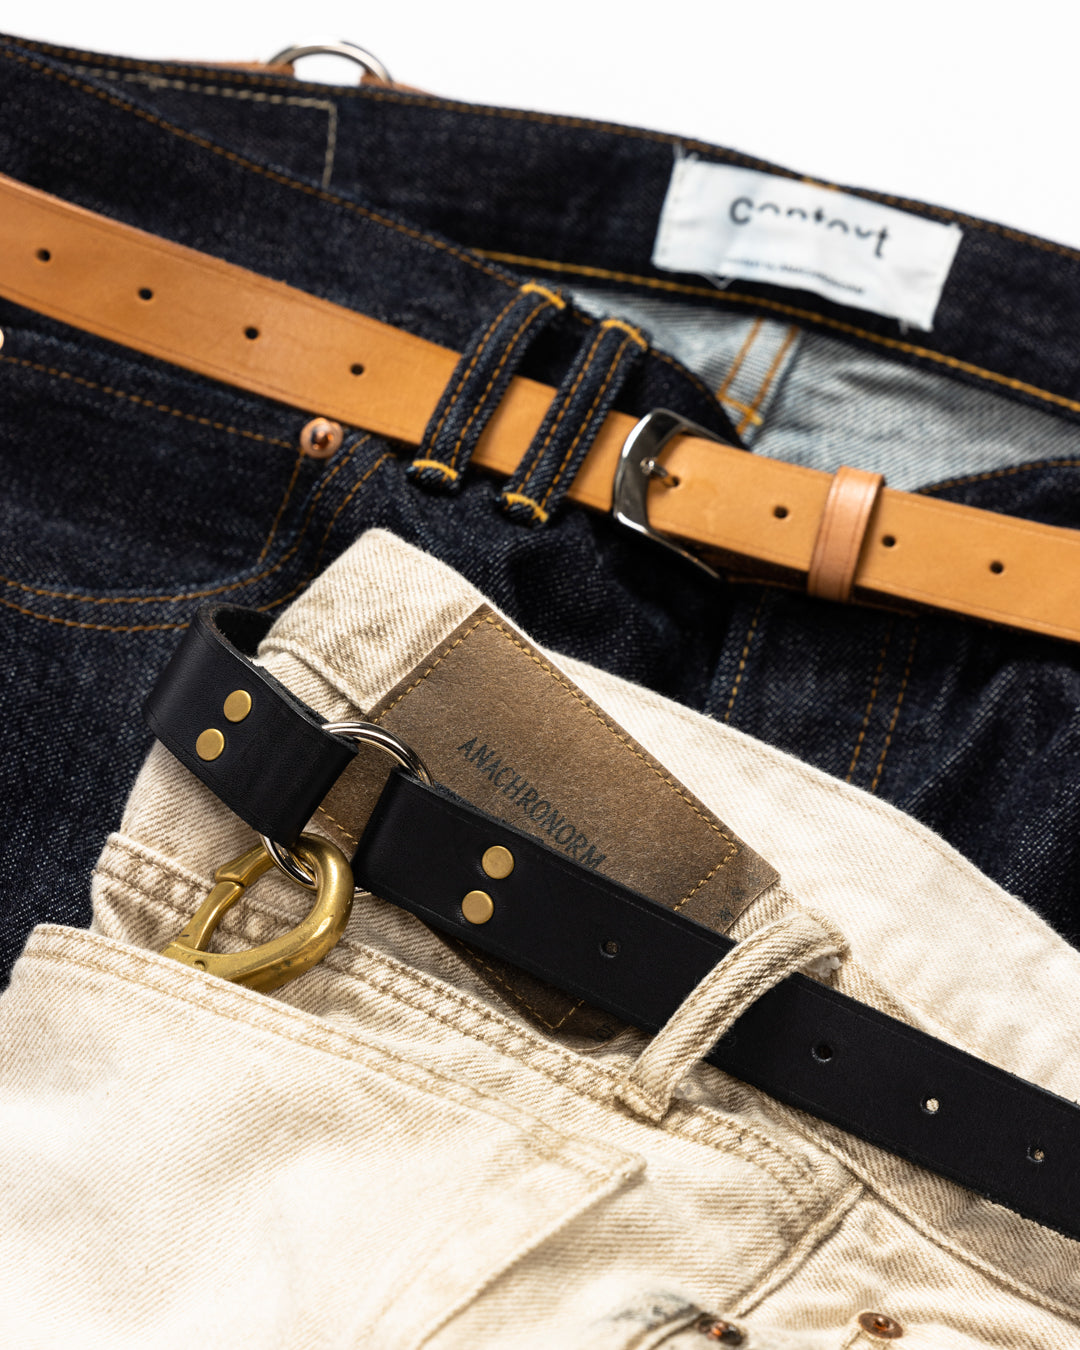 ANBB039 PINBUCKLE RING LEATHER BELT NATURAL – ANACHRONORM